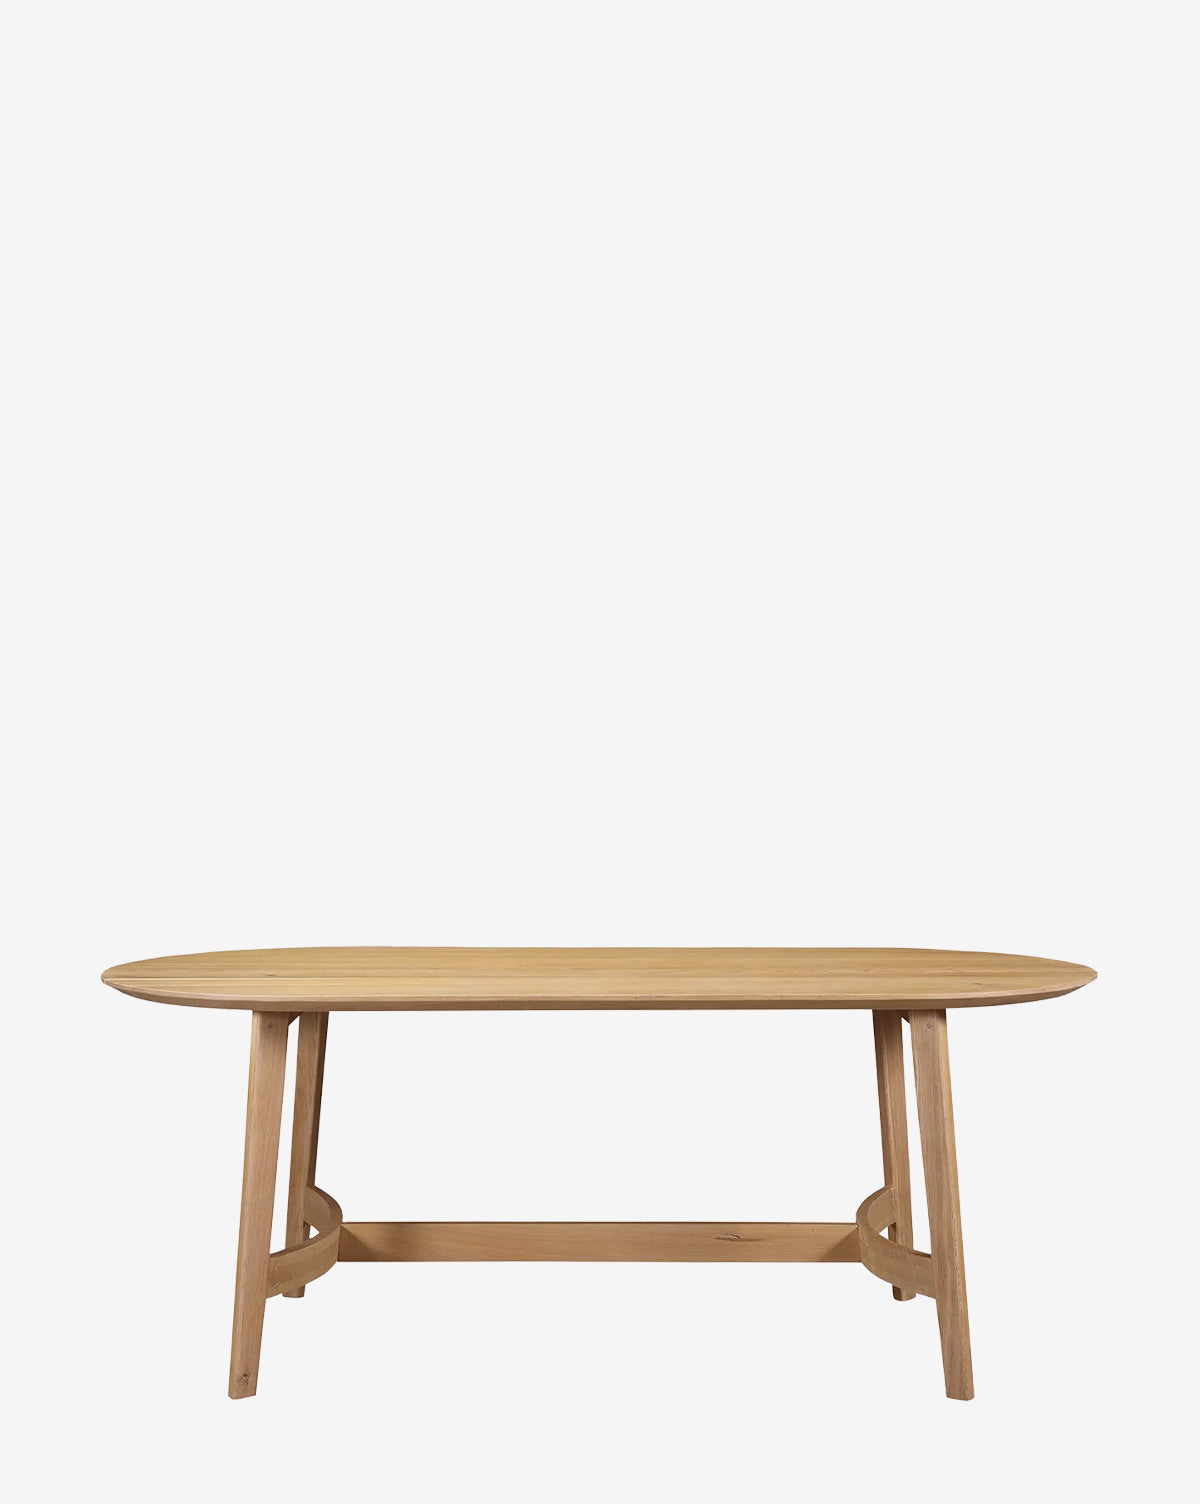 Moe's Home Collection, Satterlee Dining Table